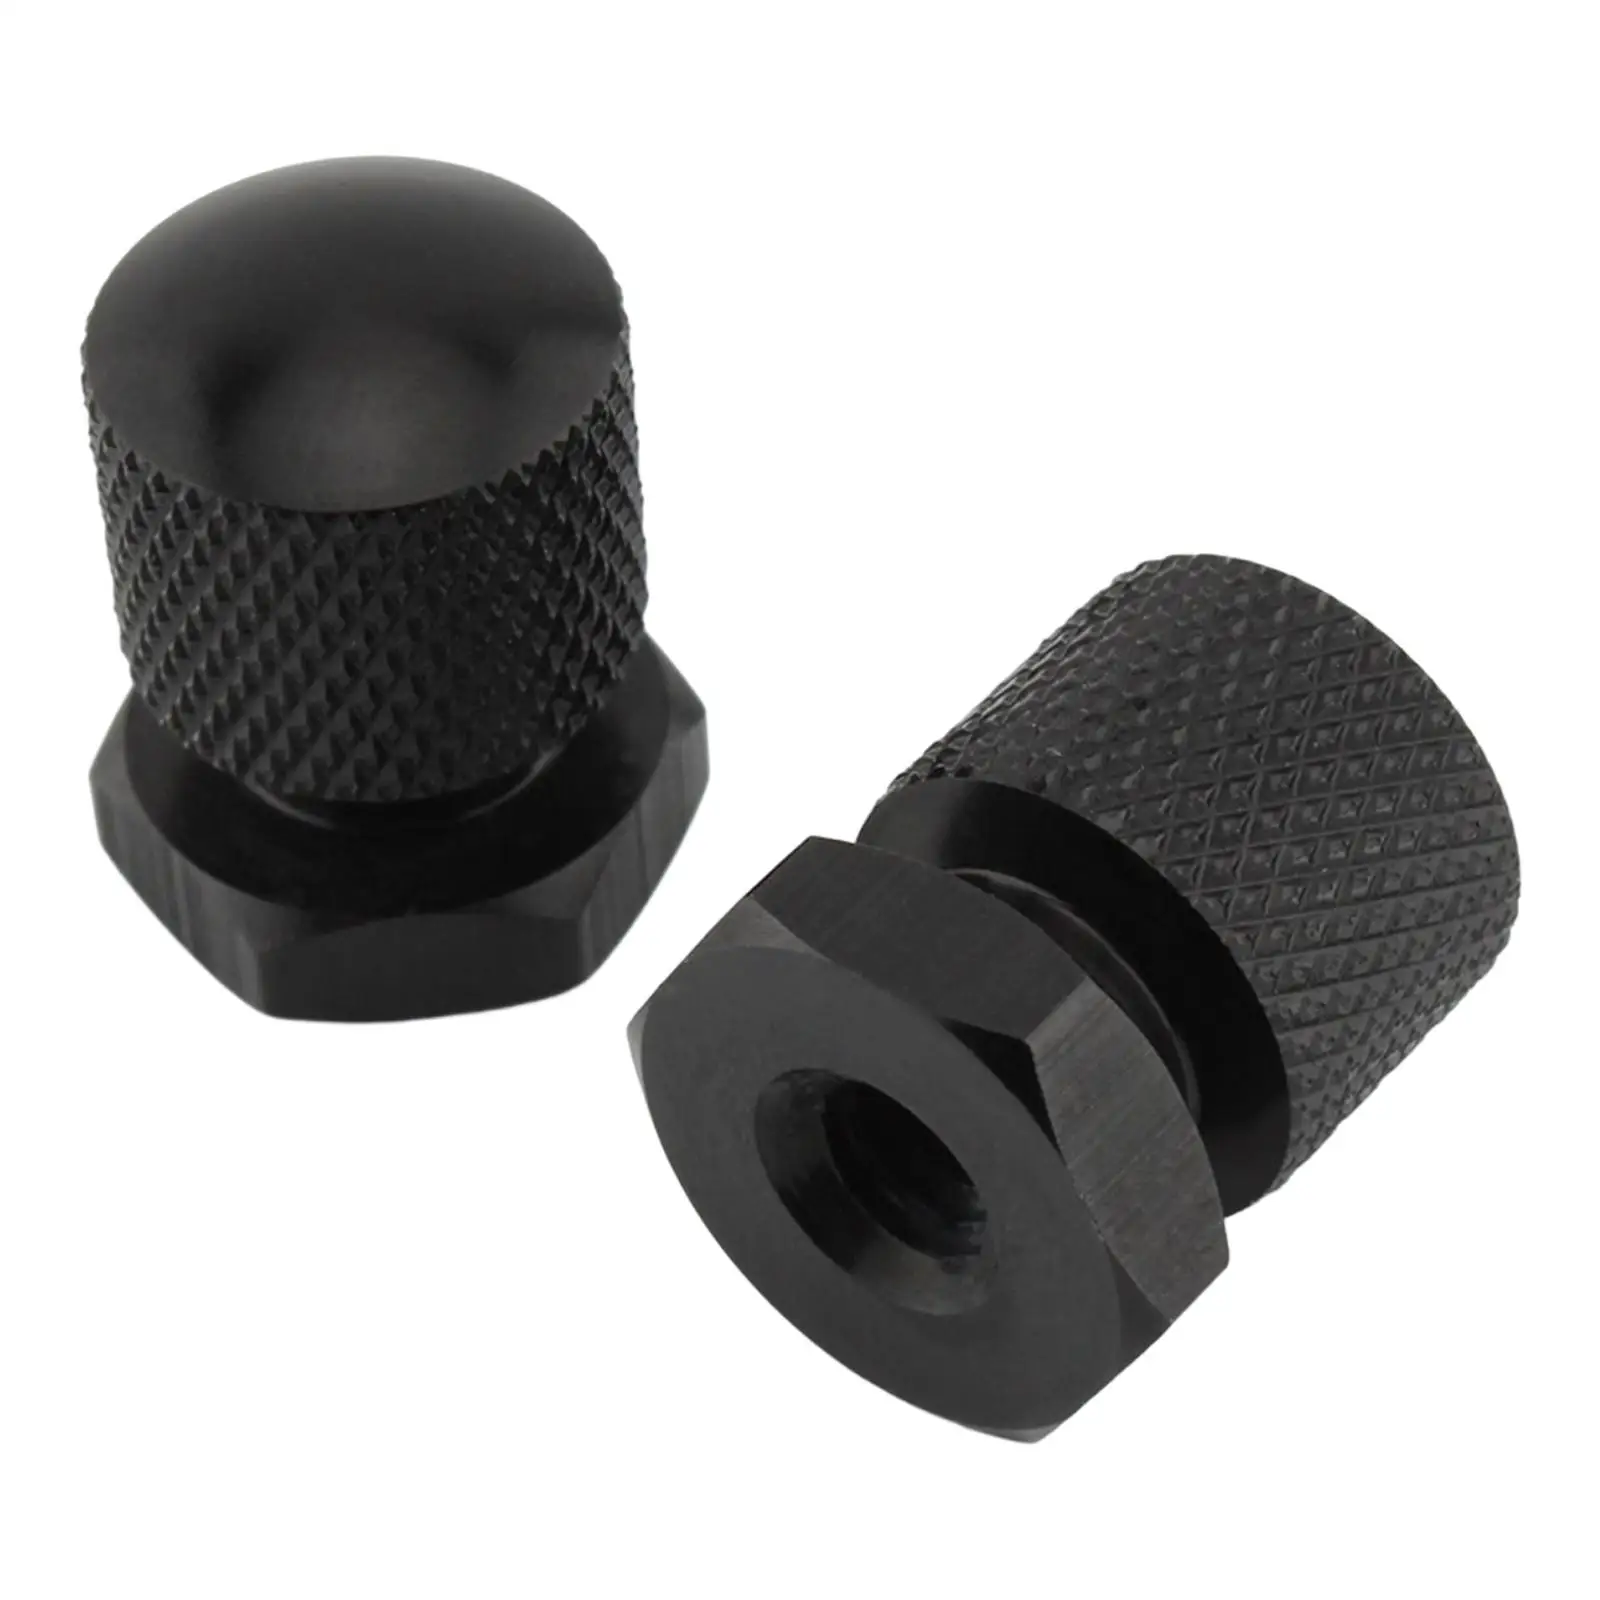 2x Seat Nuts Kit Mounting Decorations Fit for Road 18-22